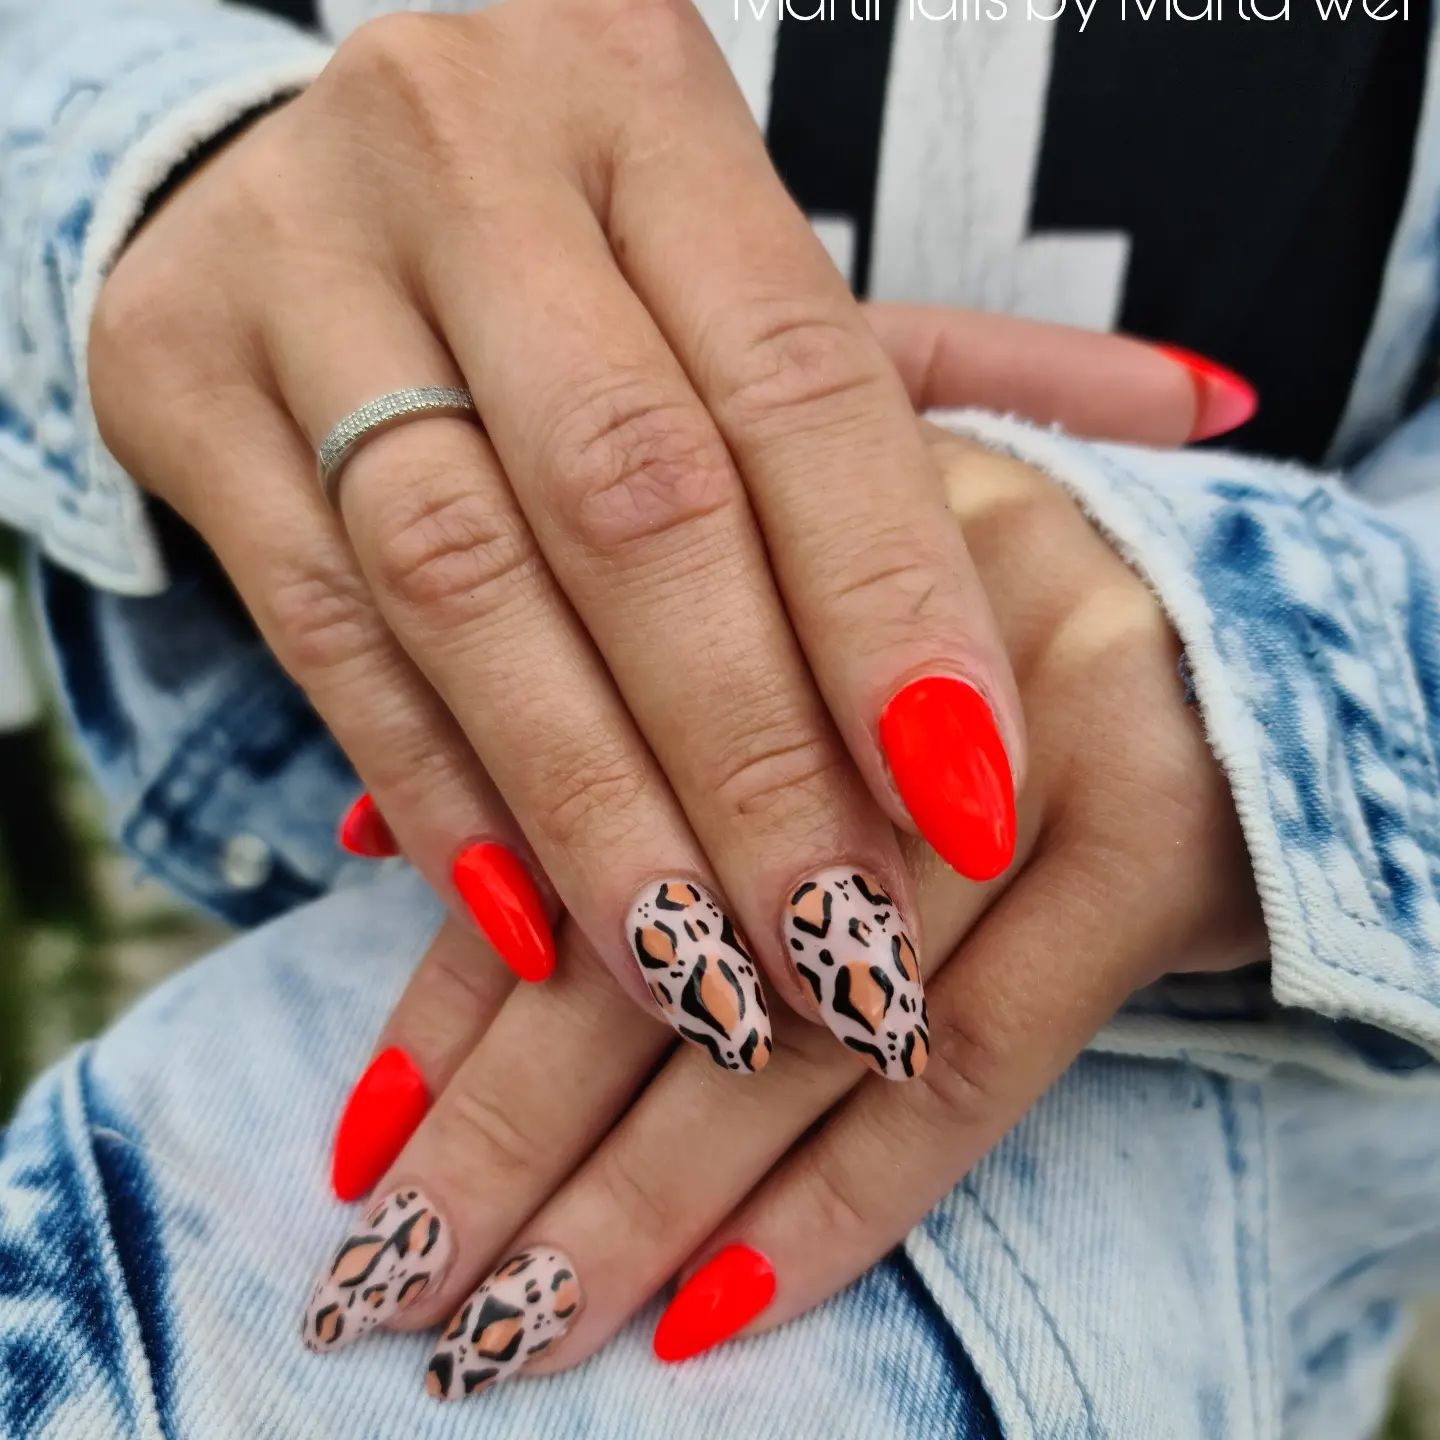 Red and leopard prints go very well together. You should definitely try this if you want to look cool.